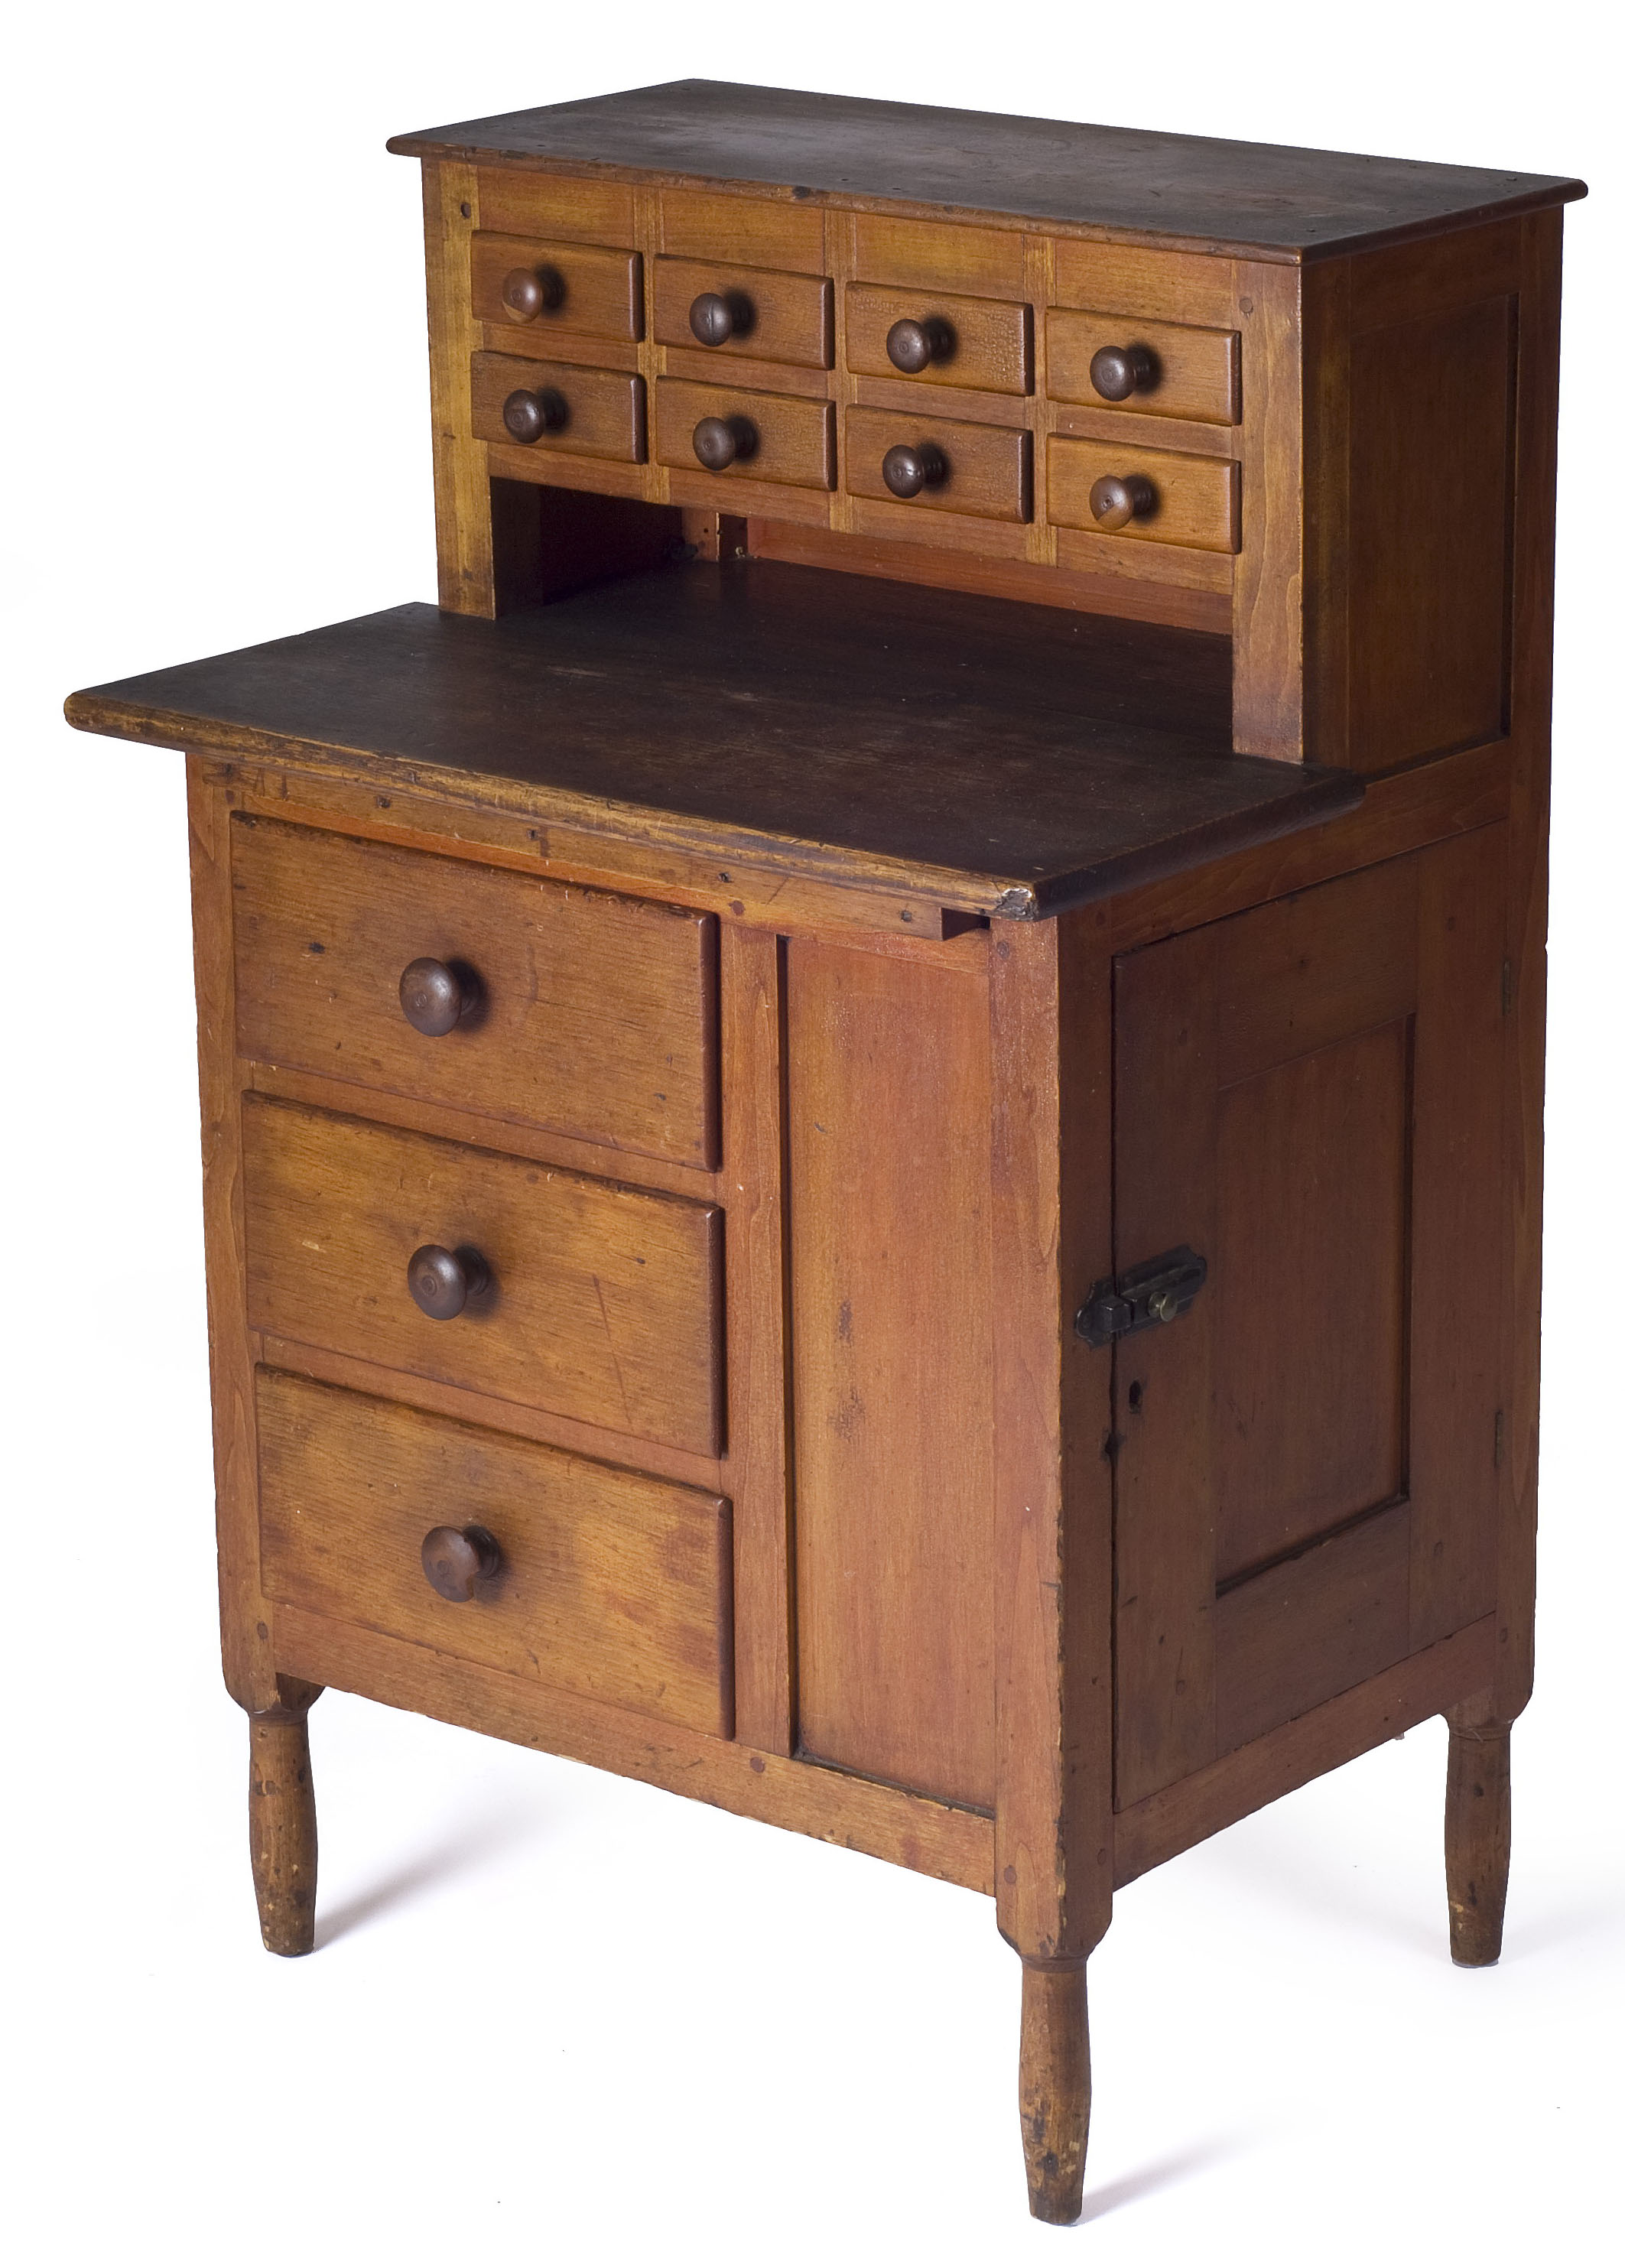 Shaker child's sewing desk, Canterbury, New Hampshire